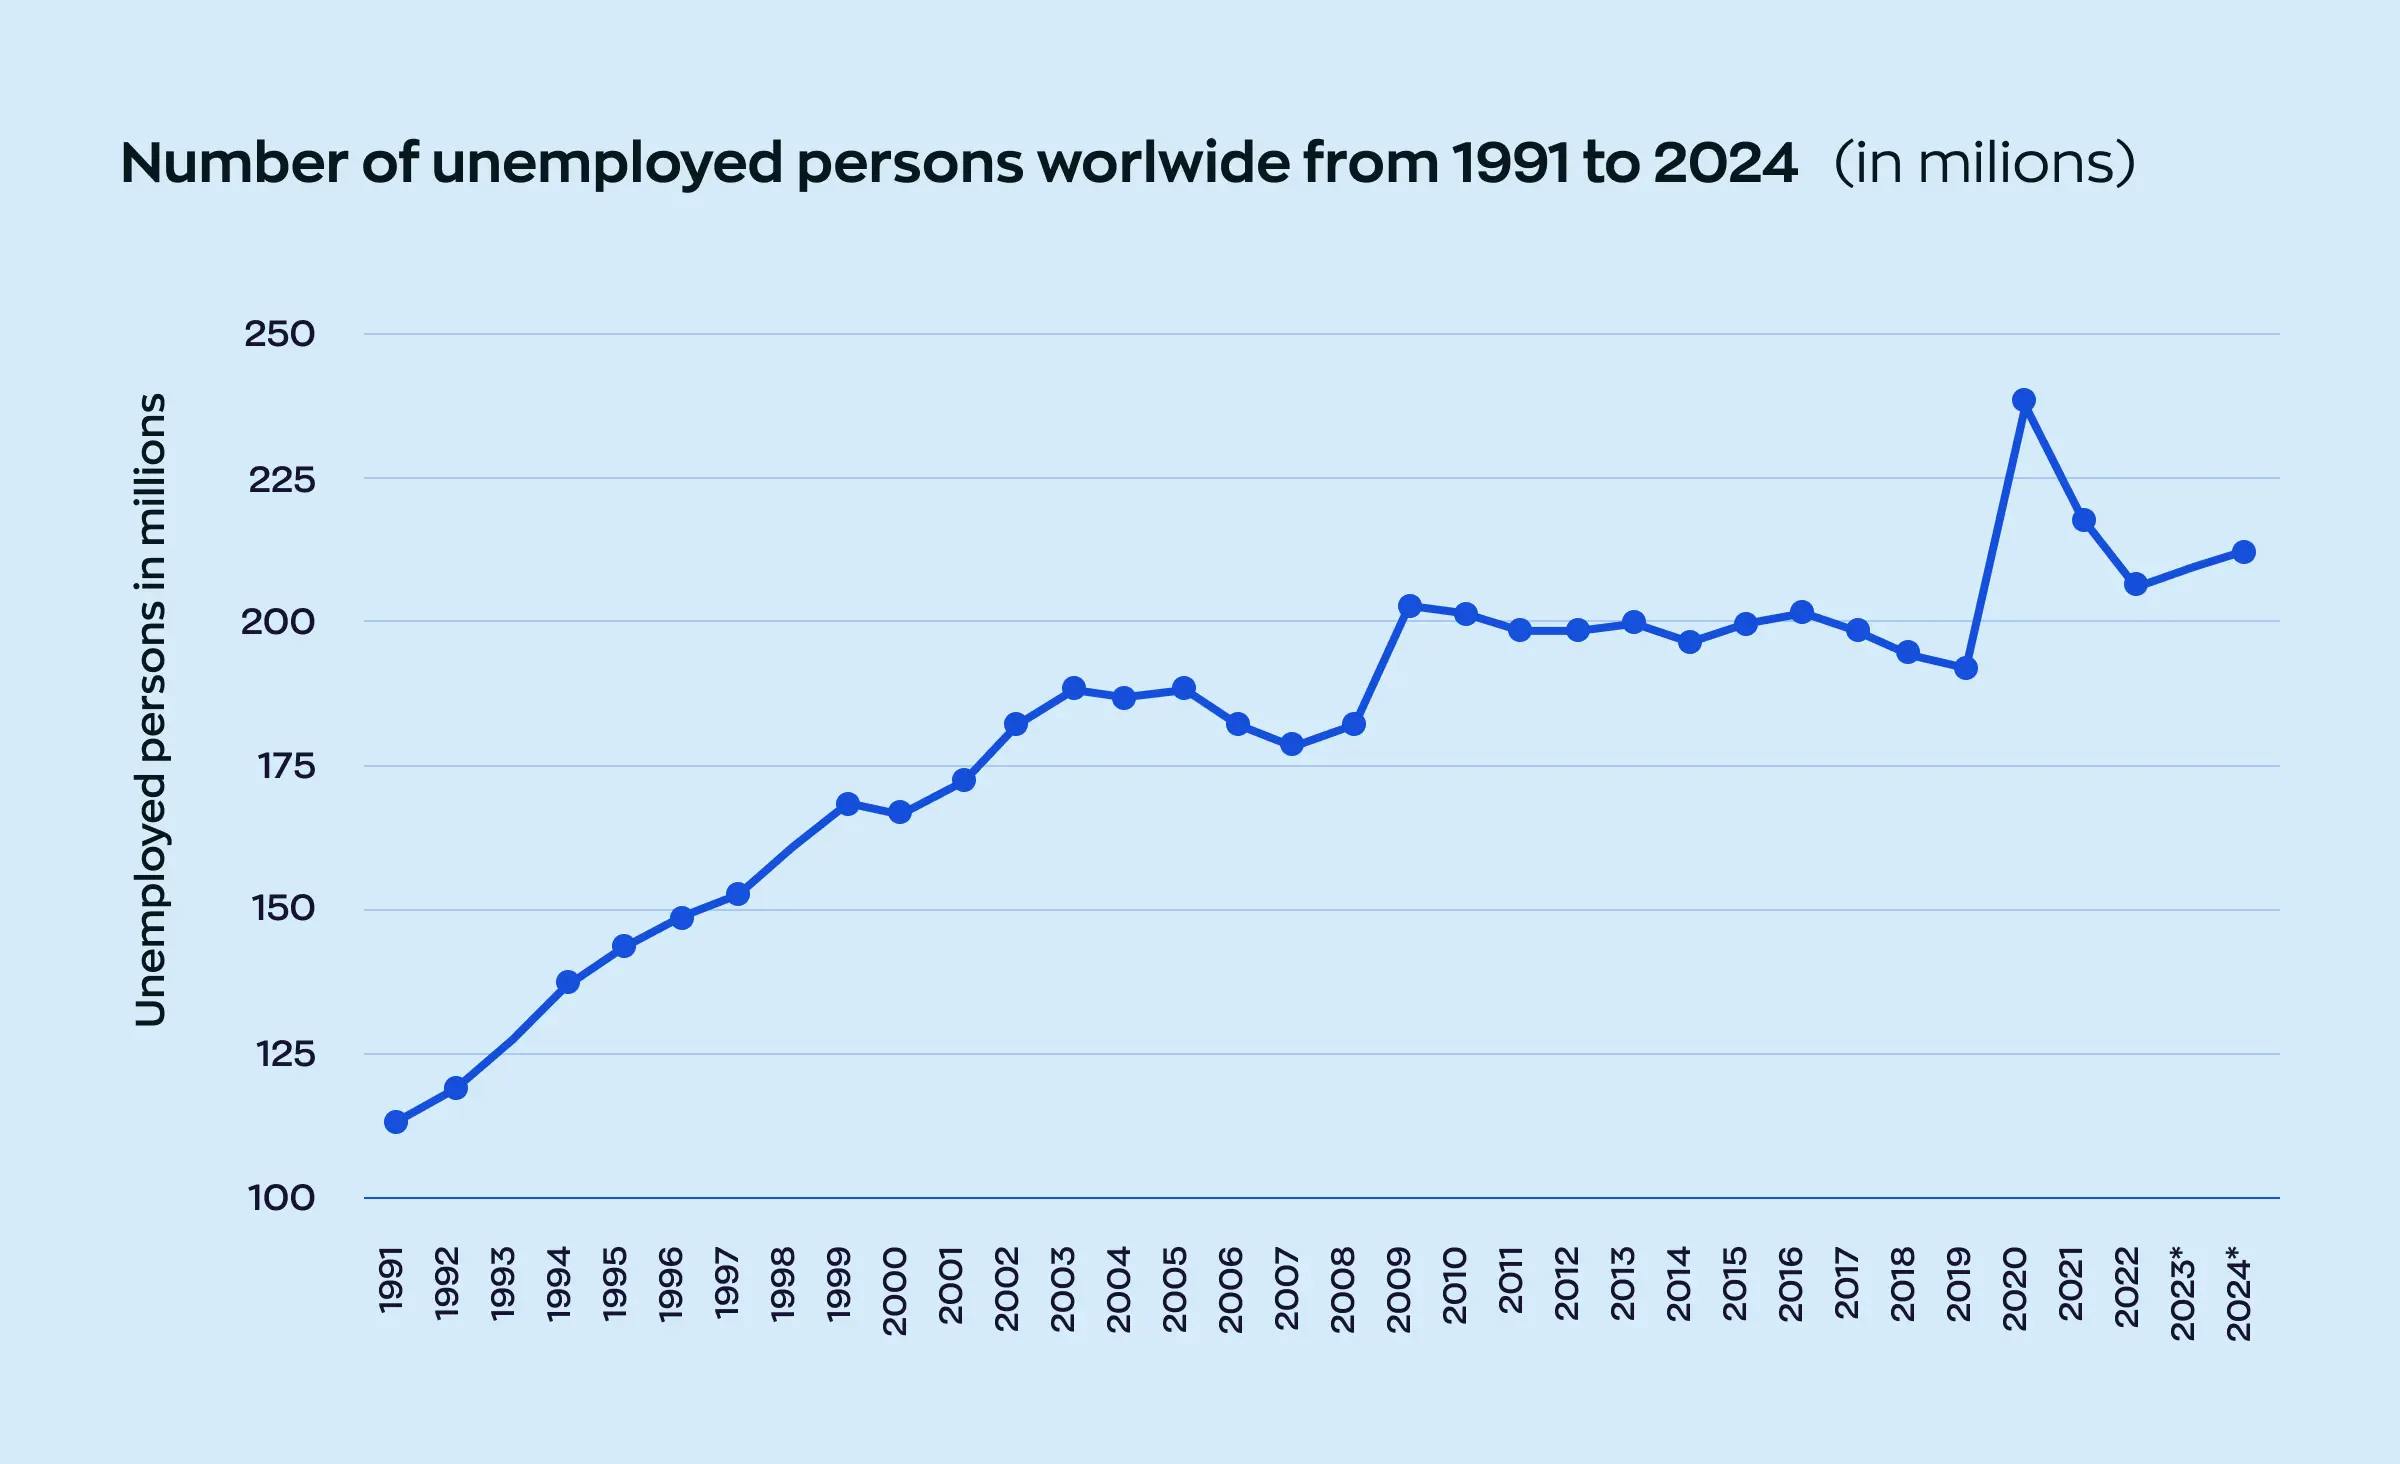 Global statistics displaying the number of unemployed persons in millions over the past decade.